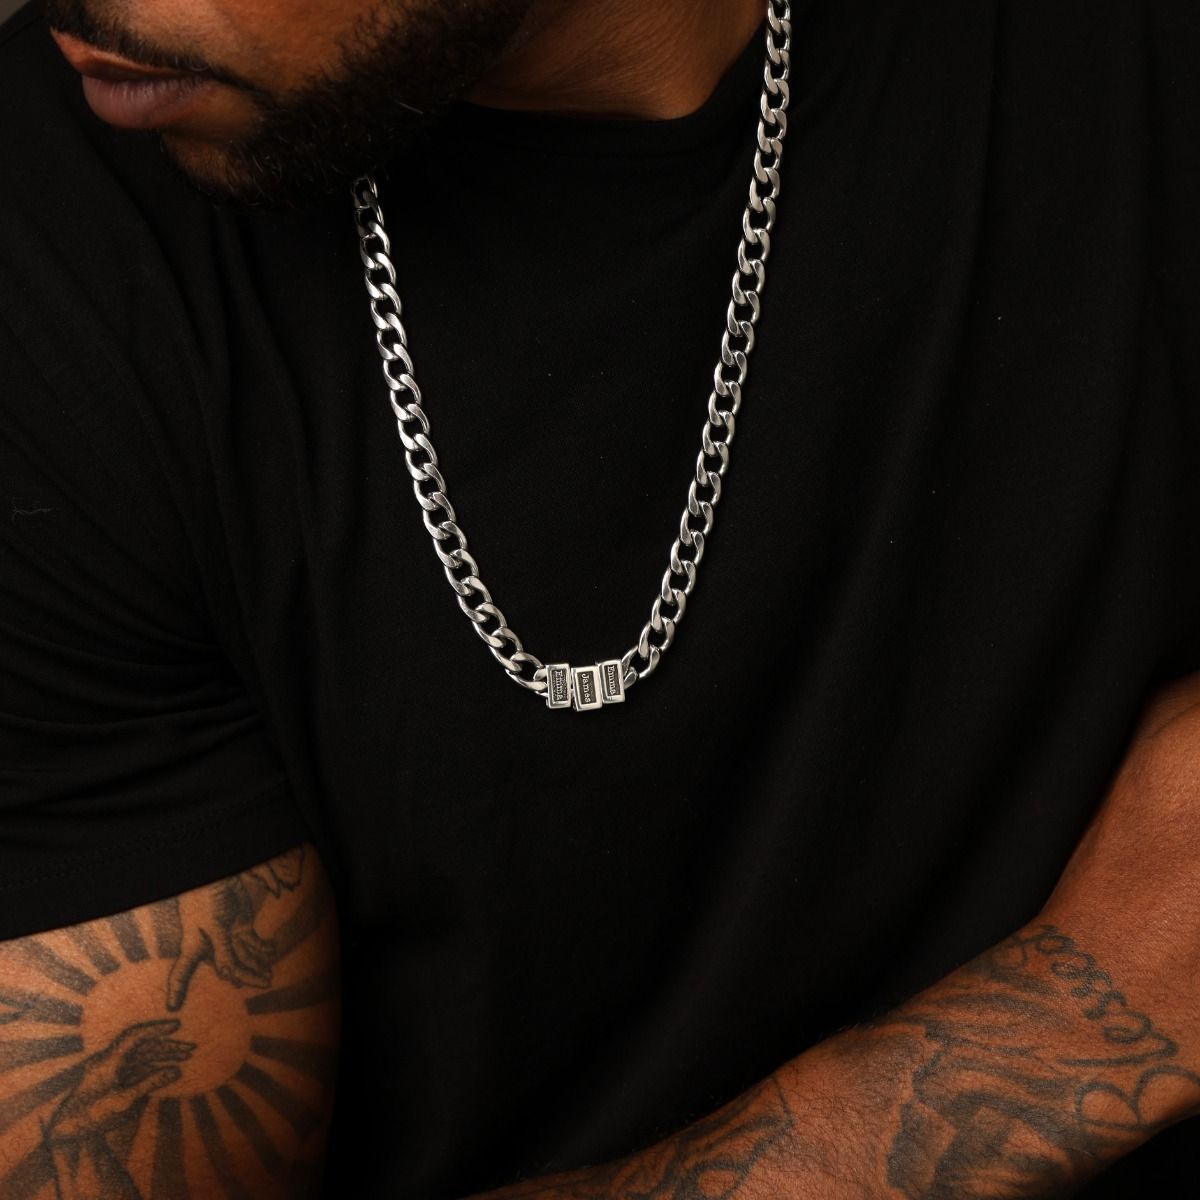 Mens Cuban Link Chain with Names - Black Chain by Talisa